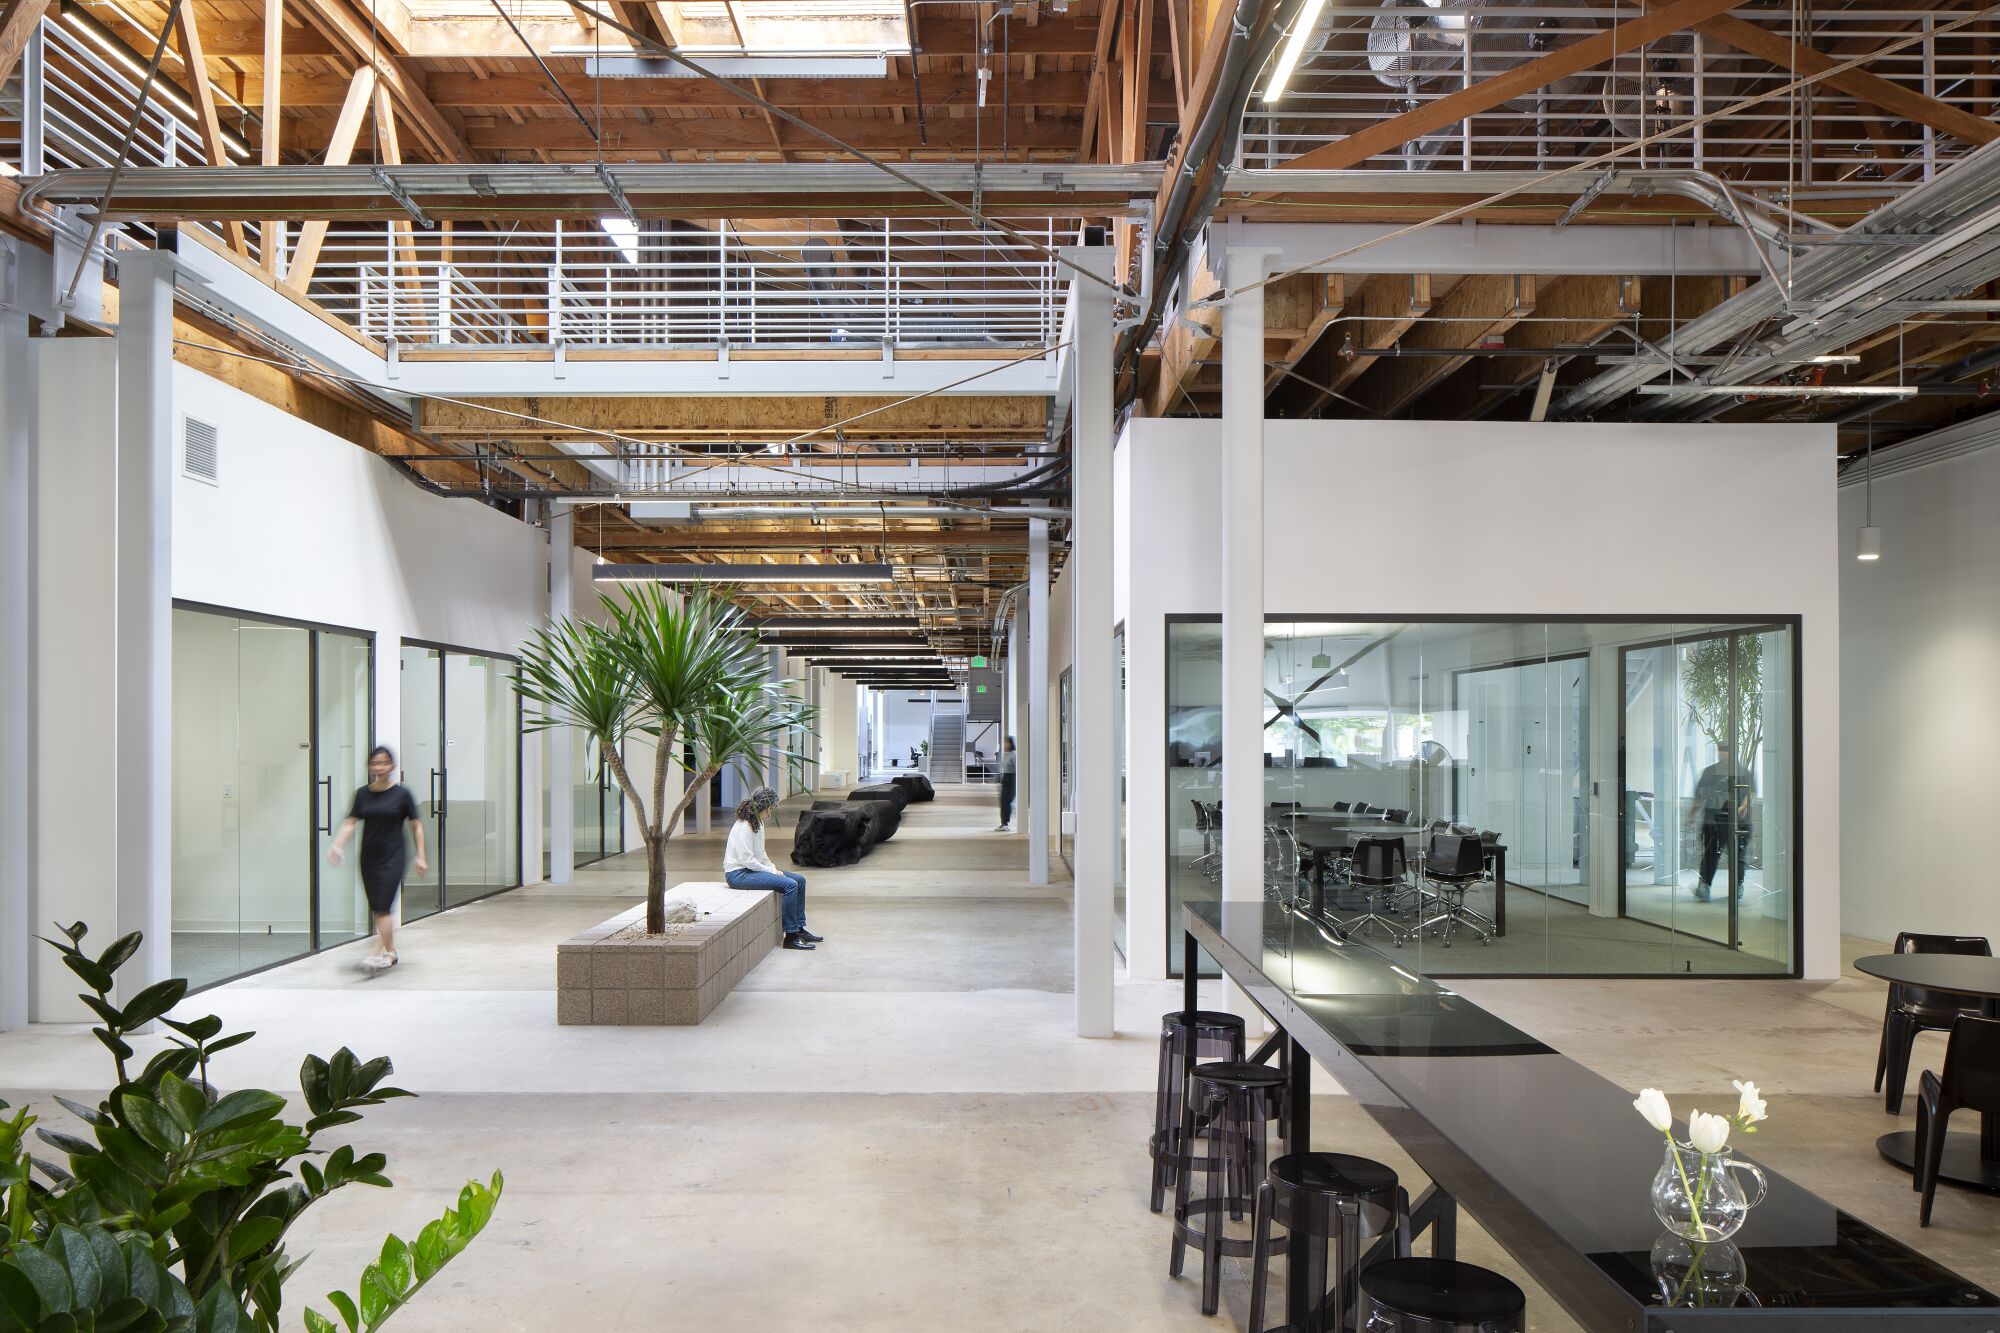 Headquarters for a 60,000-square-foot tech company designed by RADAR, an architectural office founded by Rachel Allen. The office was completed just weeks before the governor's safer-at-home order shut down most offices.